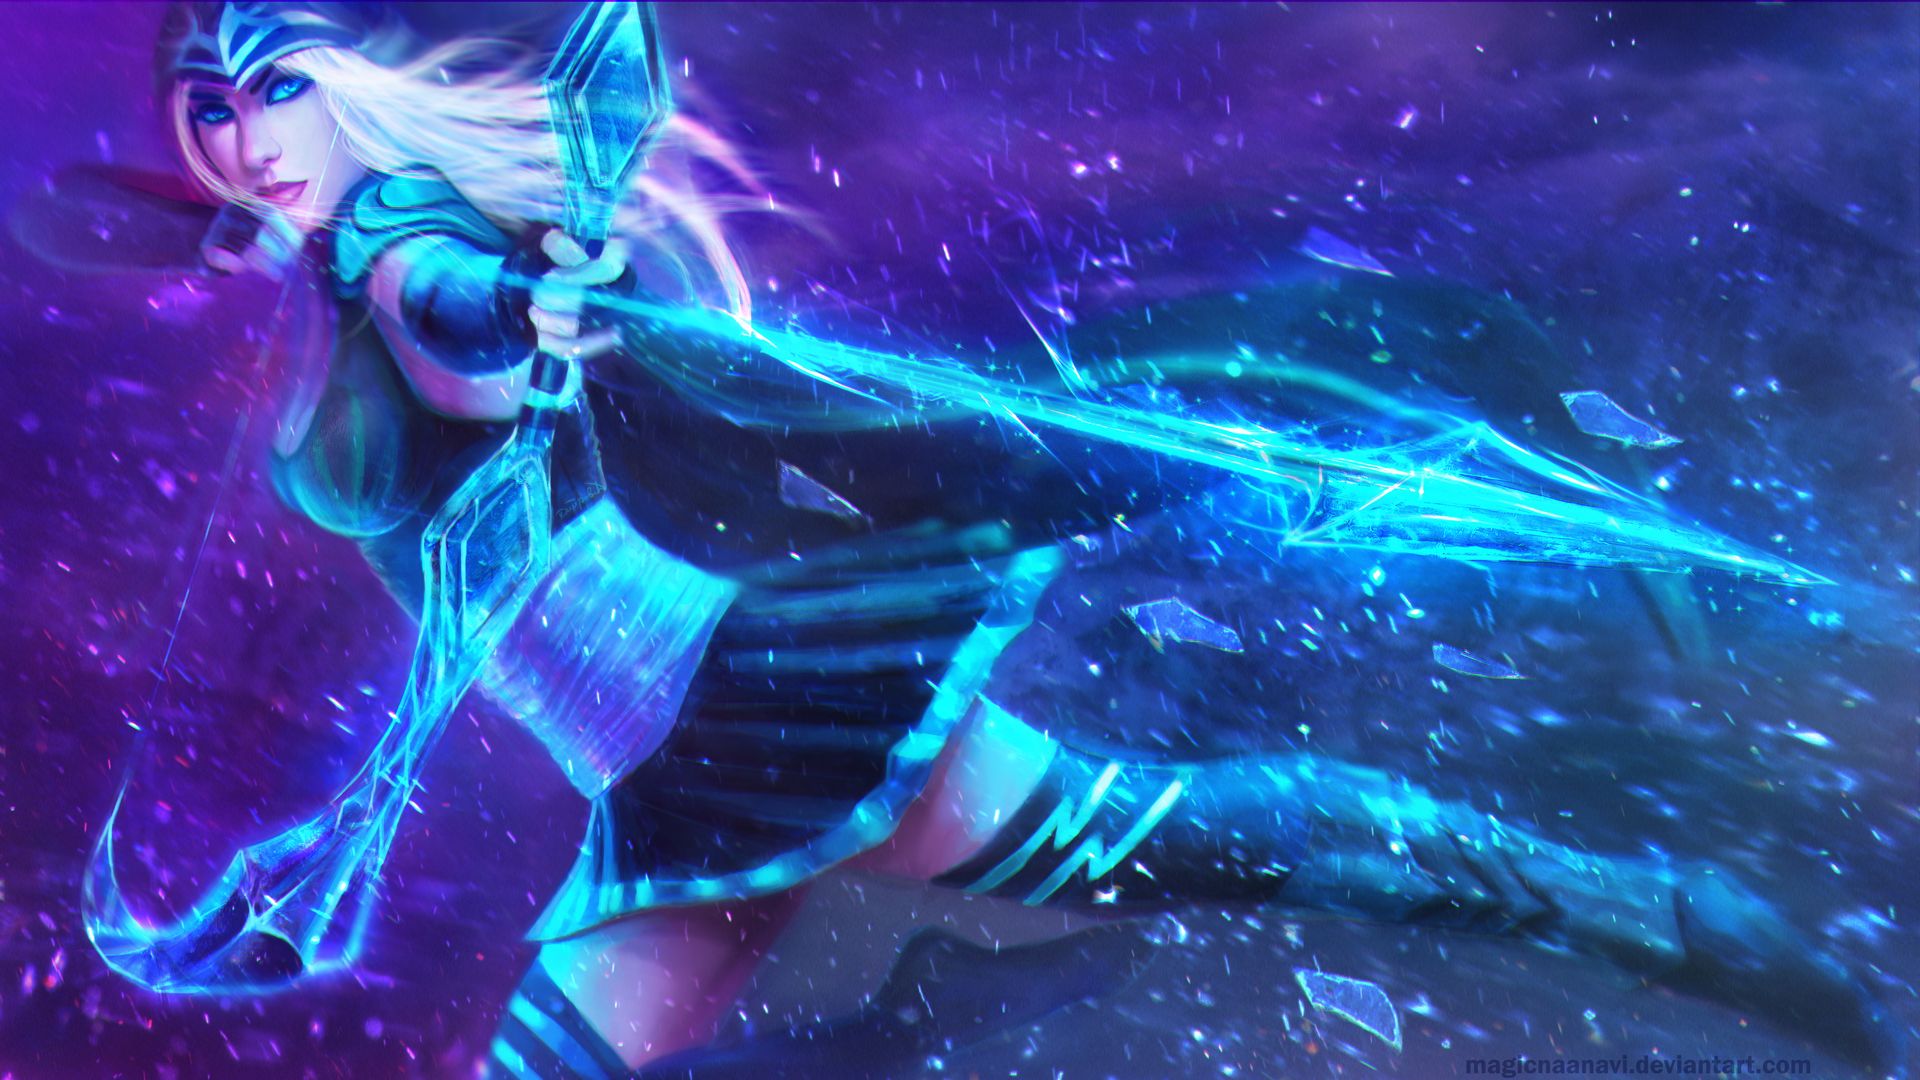 Ashe Wallpaper. LOL Ashe Wallpaper, Ashe Wallpaper and Bashe Wallpaper